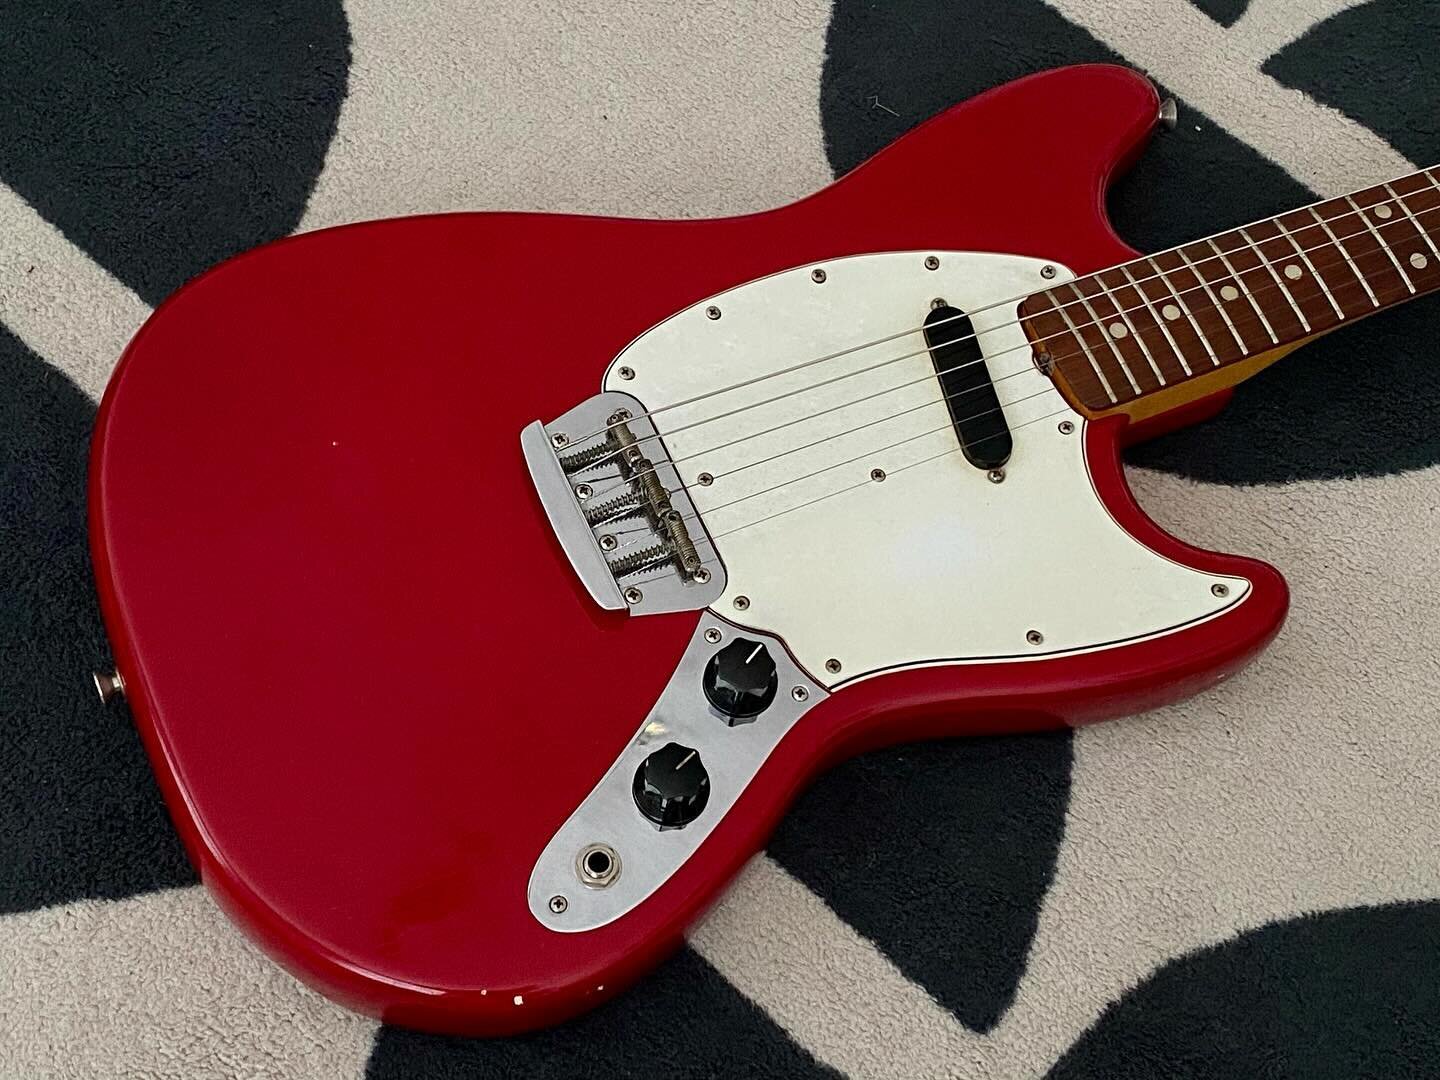 Ruby Tuesday. New arrival, a very clean original 1966 Fender Musicmaster II in Dakota Red. Comes with the original case and hang tags. More details soon.
.
www.20thcenturytoys.co
.
#fendermusicmaster #dakotared #offset #offsetguitar 
#geartalk #music